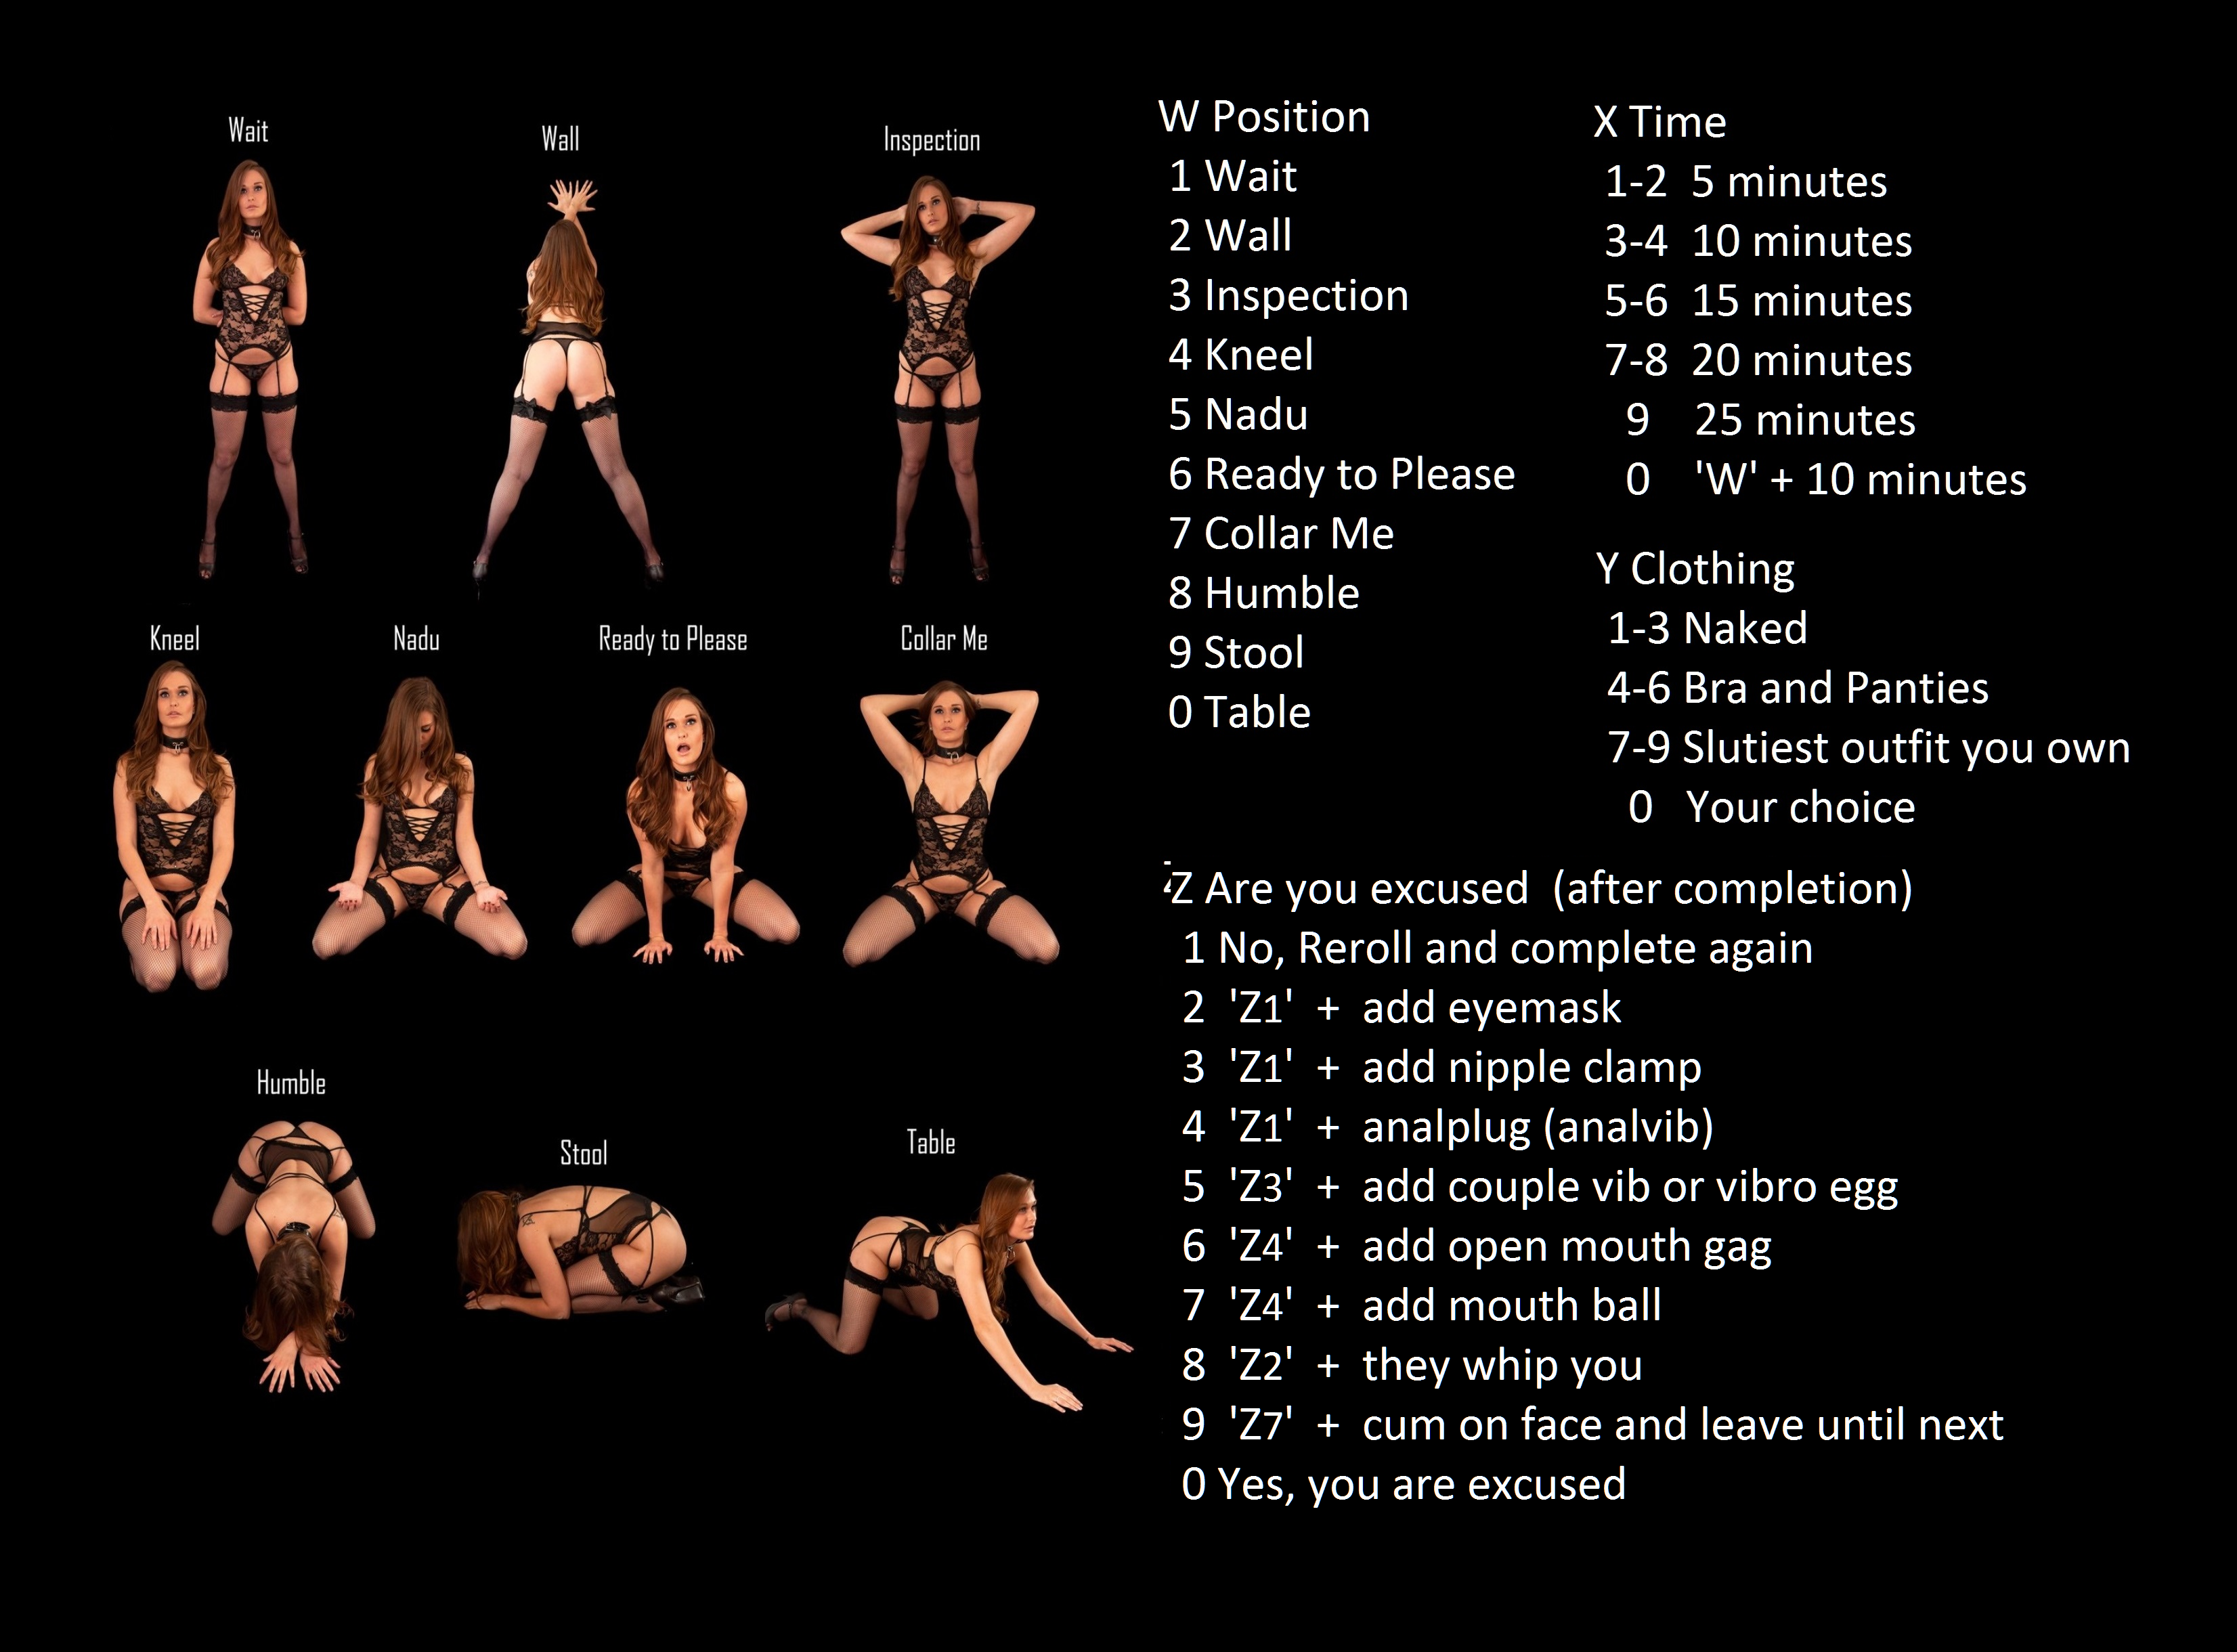 Submissive training positions